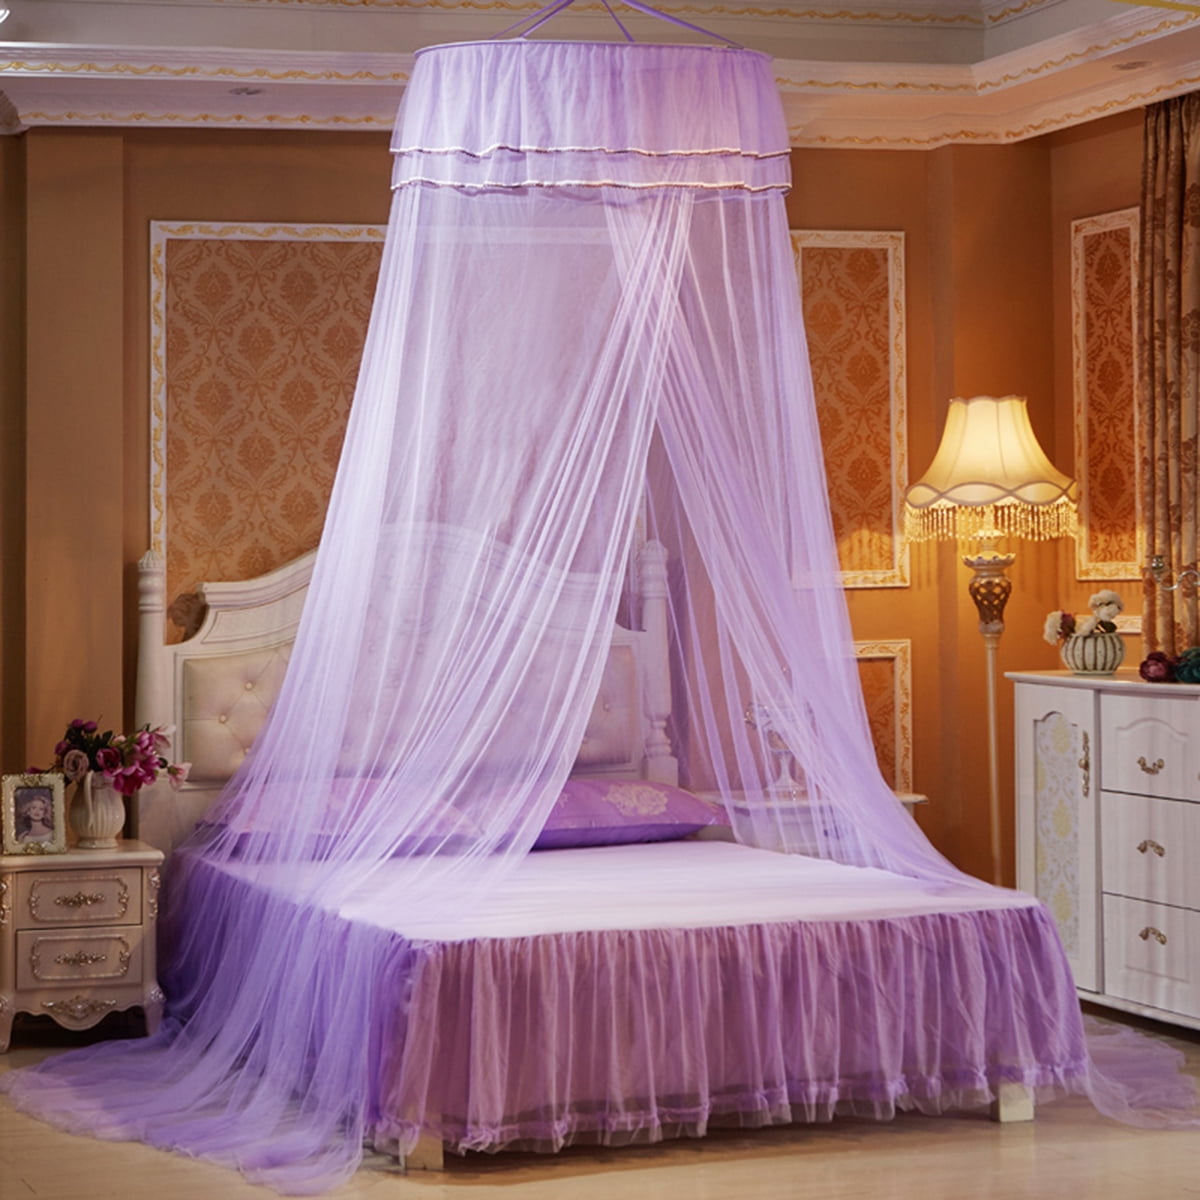 Lace Canopy Bed Curtain Dome Fly Midges Insect Cot Stopping Mosquito Net Set New 